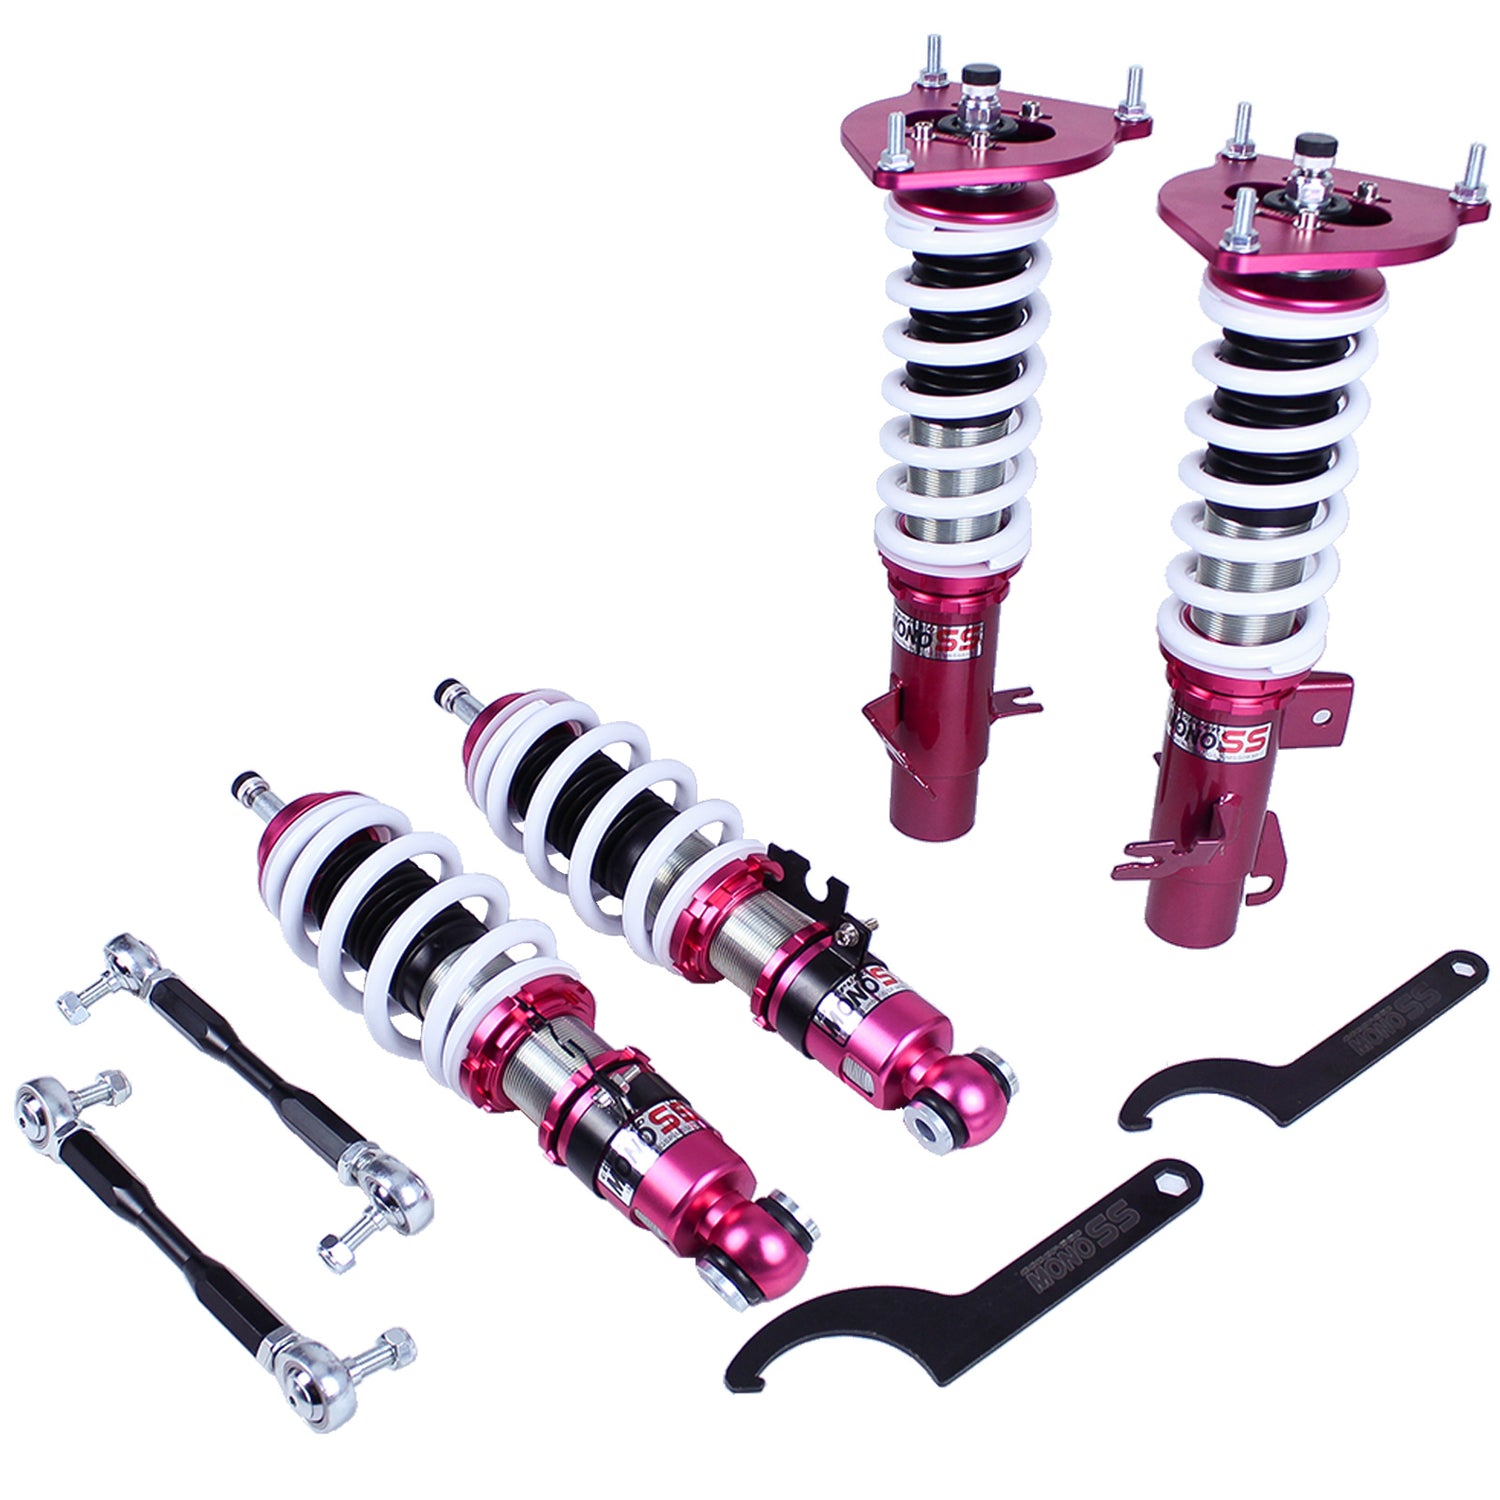 Godspeed MSS0820-C MonoSS Coilover Lowering Kit, Fully Adjustable, Ride Height, Spring Tension And 16 Click Damping, MINI Convertible(R52) 2004-08